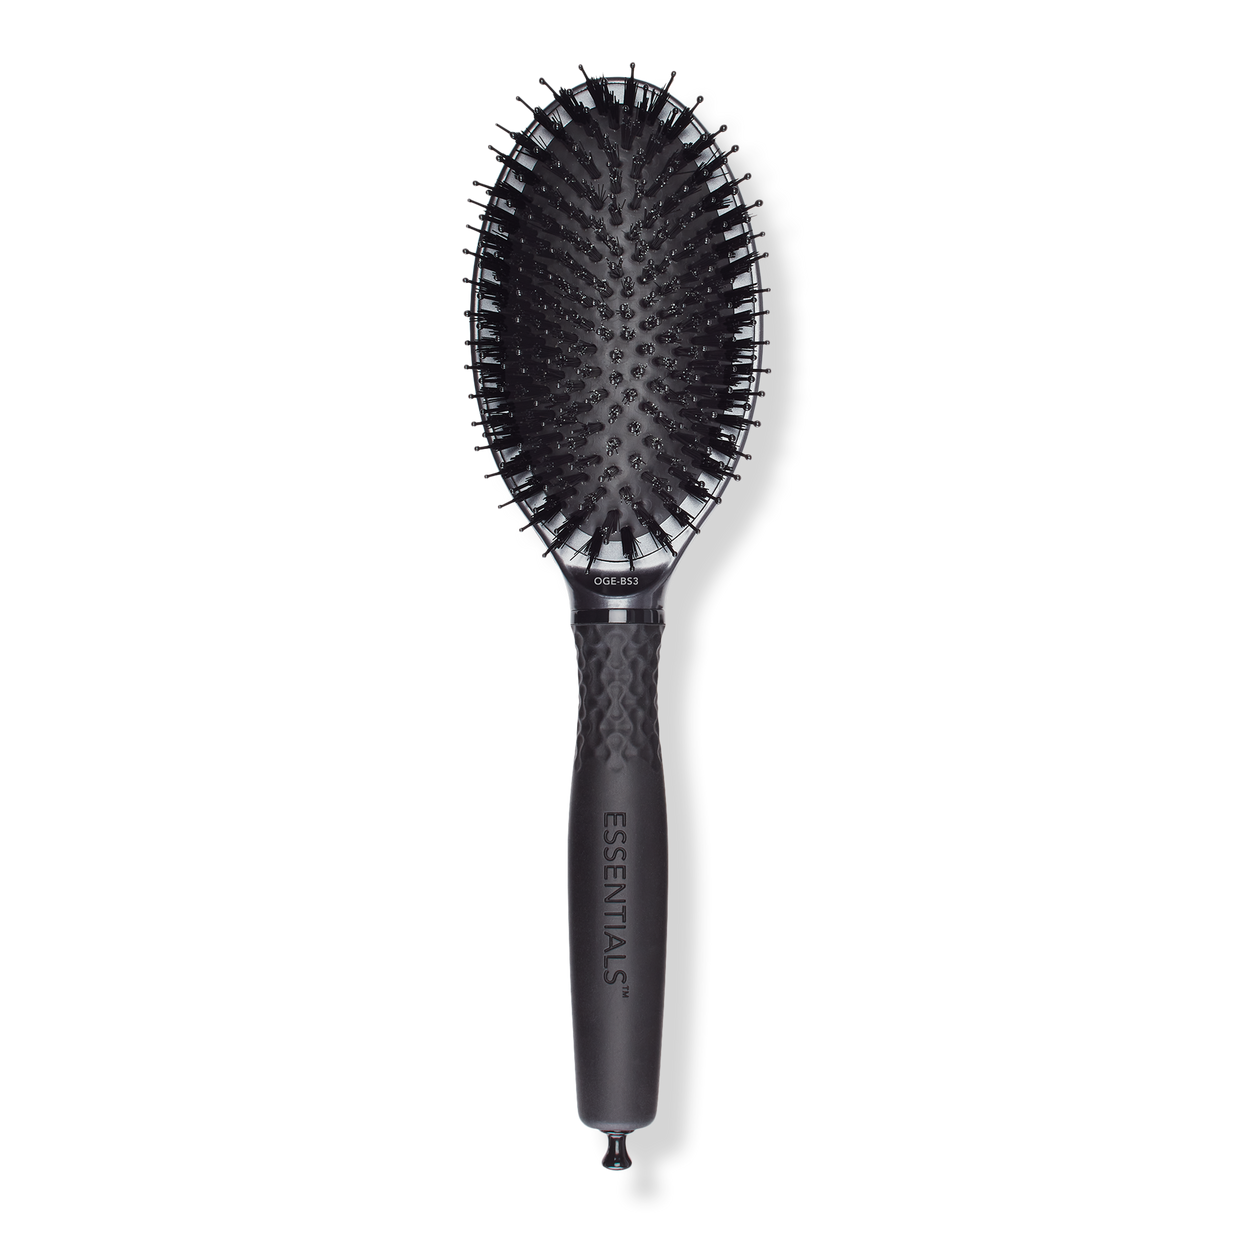 Essentials Styling Collection Smoothing Paddle Brush - Olivia Garden